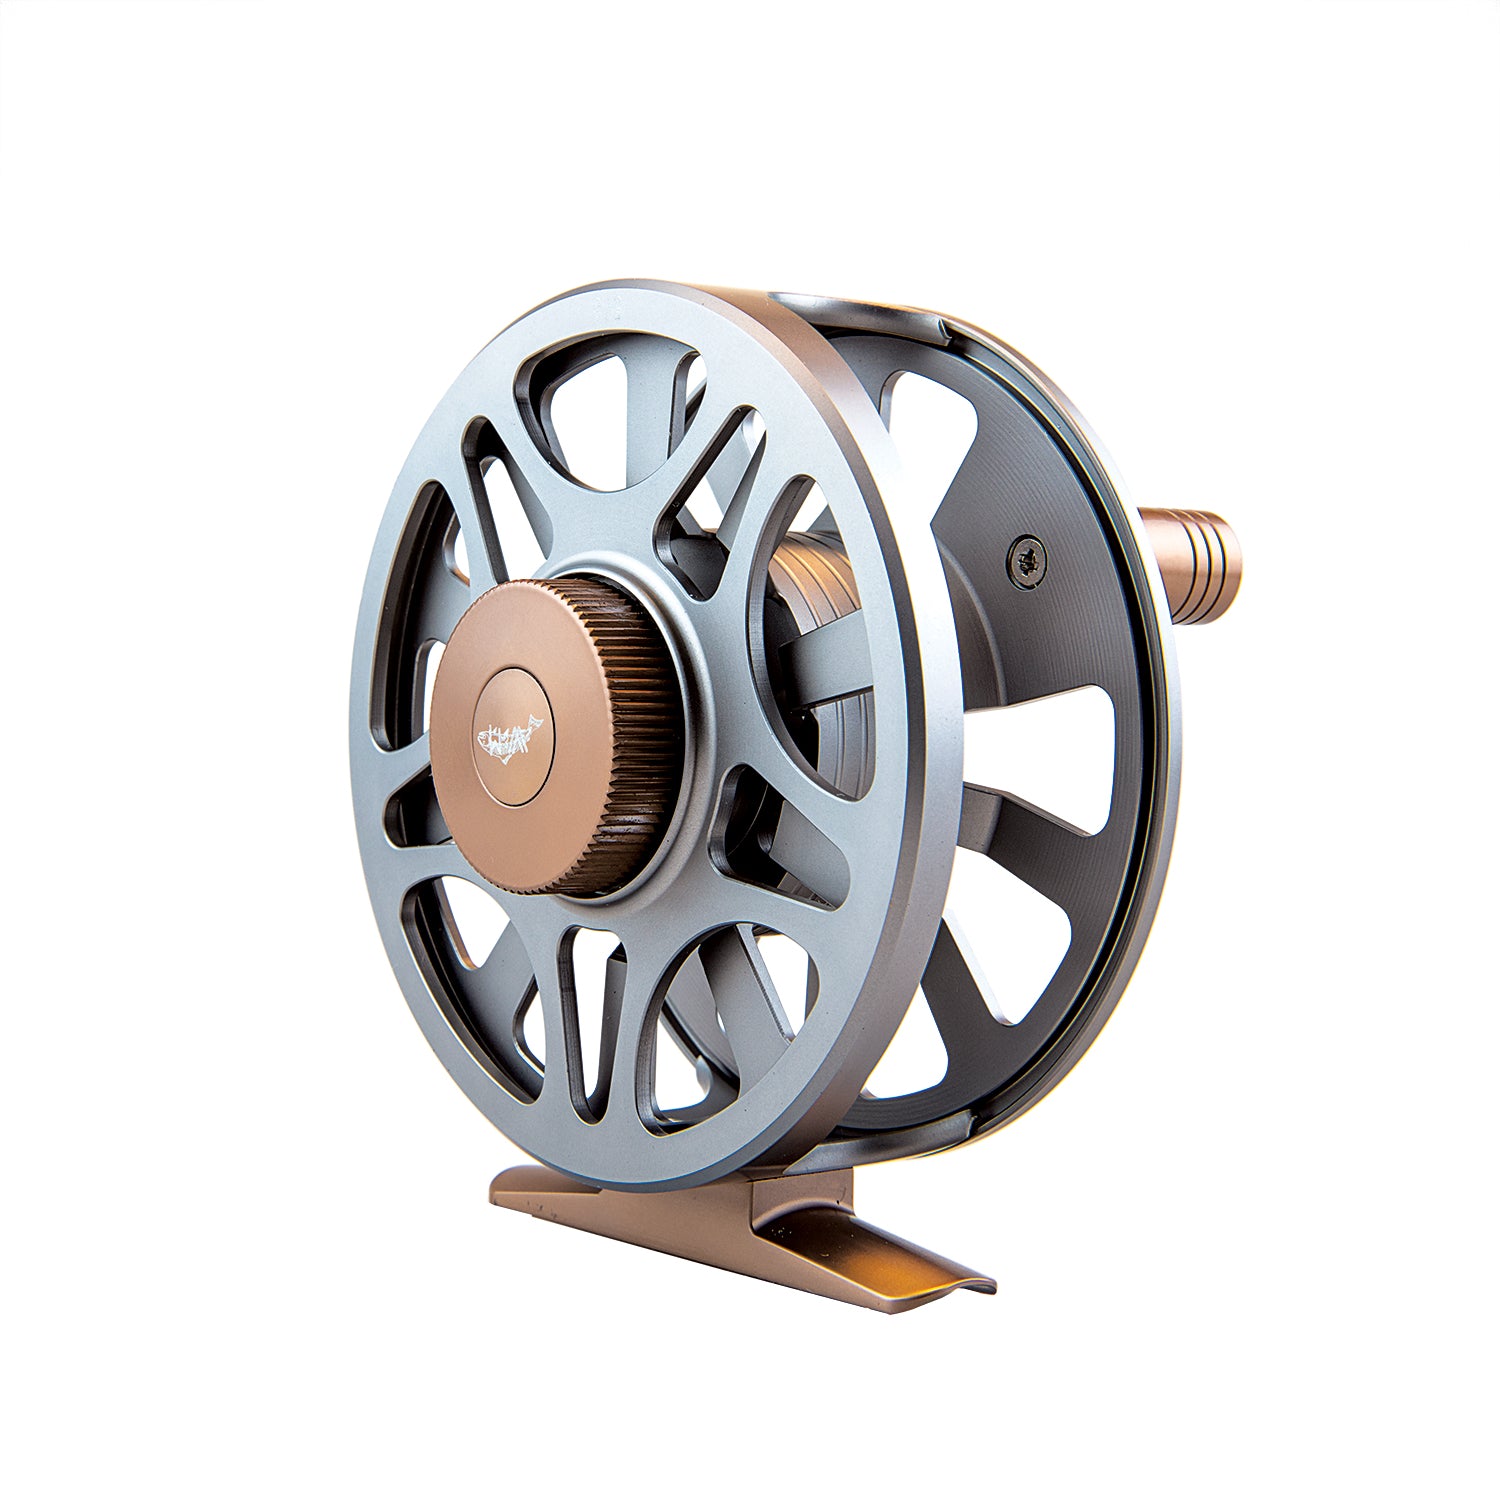 BAUER MACKENZIE XTREME PERFECT MXP2 (3 5 WT) FLY REEL on PopScreen